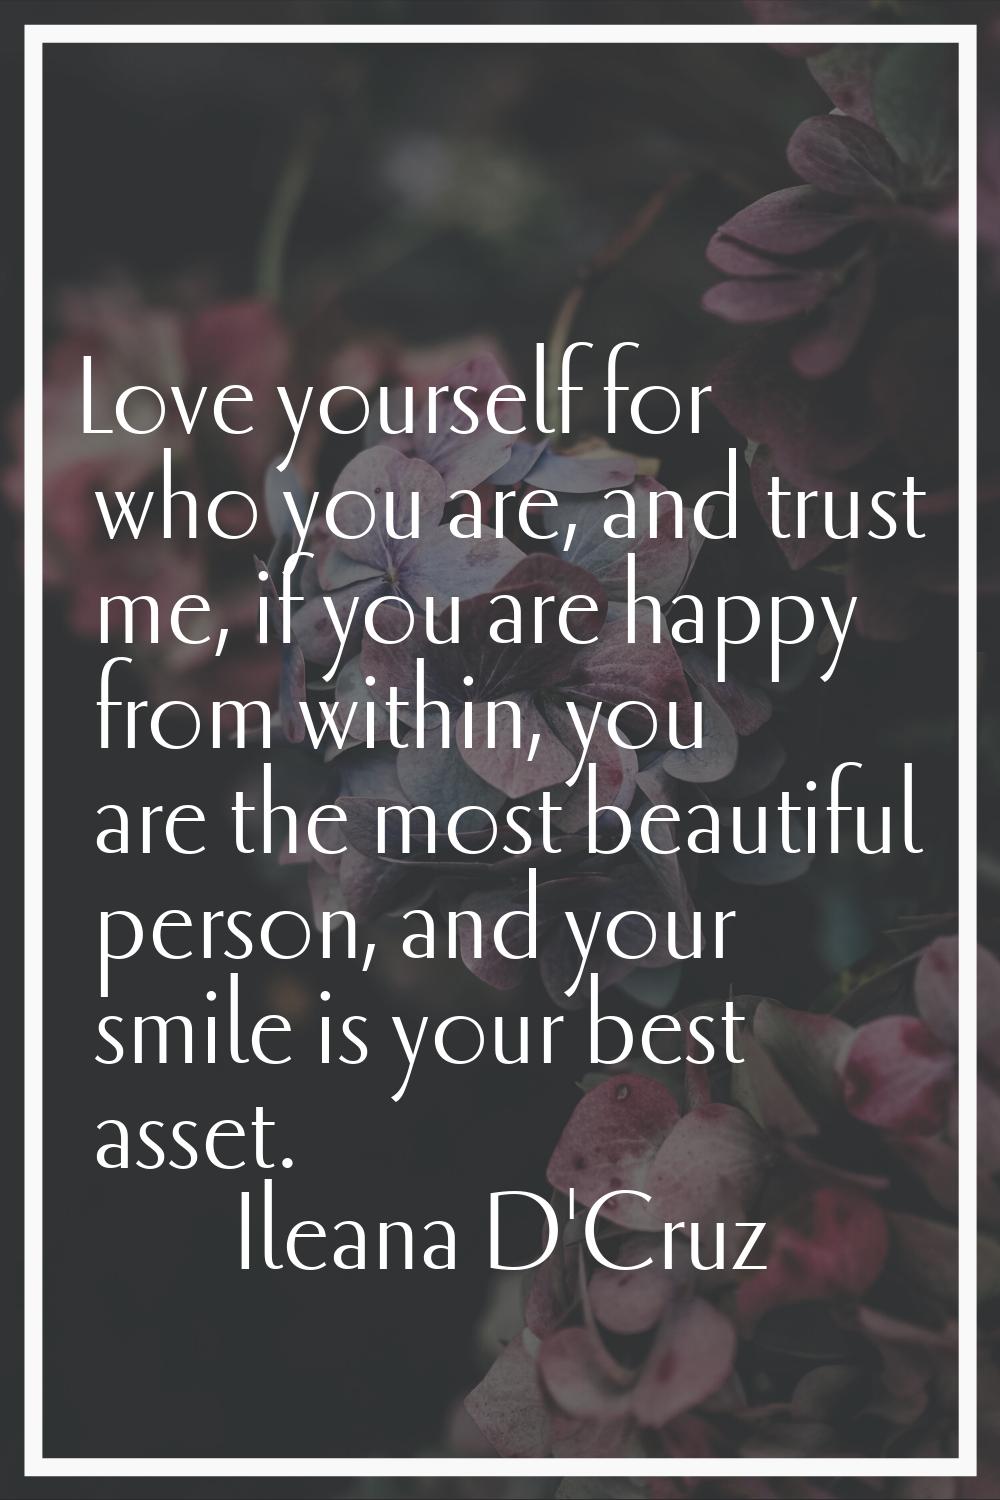 Love yourself for who you are, and trust me, if you are happy from within, you are the most beautif